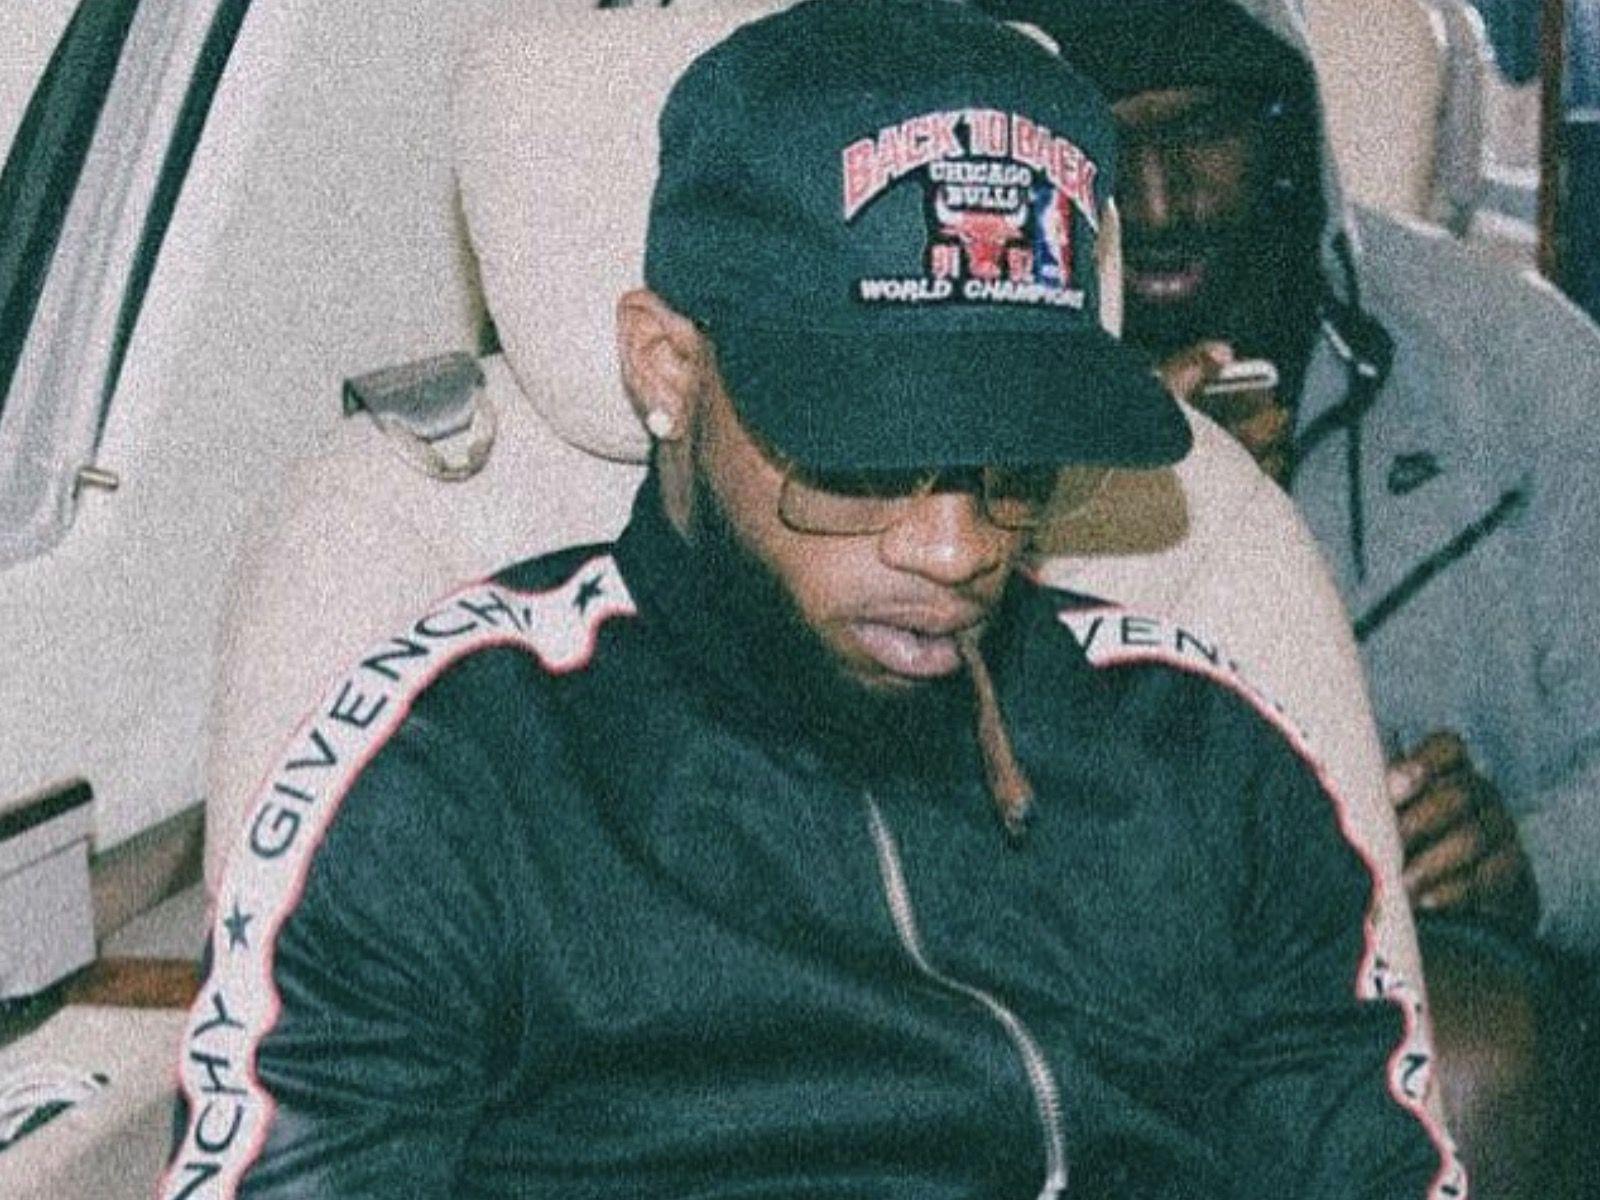 Tory Lanez Plans To Change The Game W/ New Album Announcement